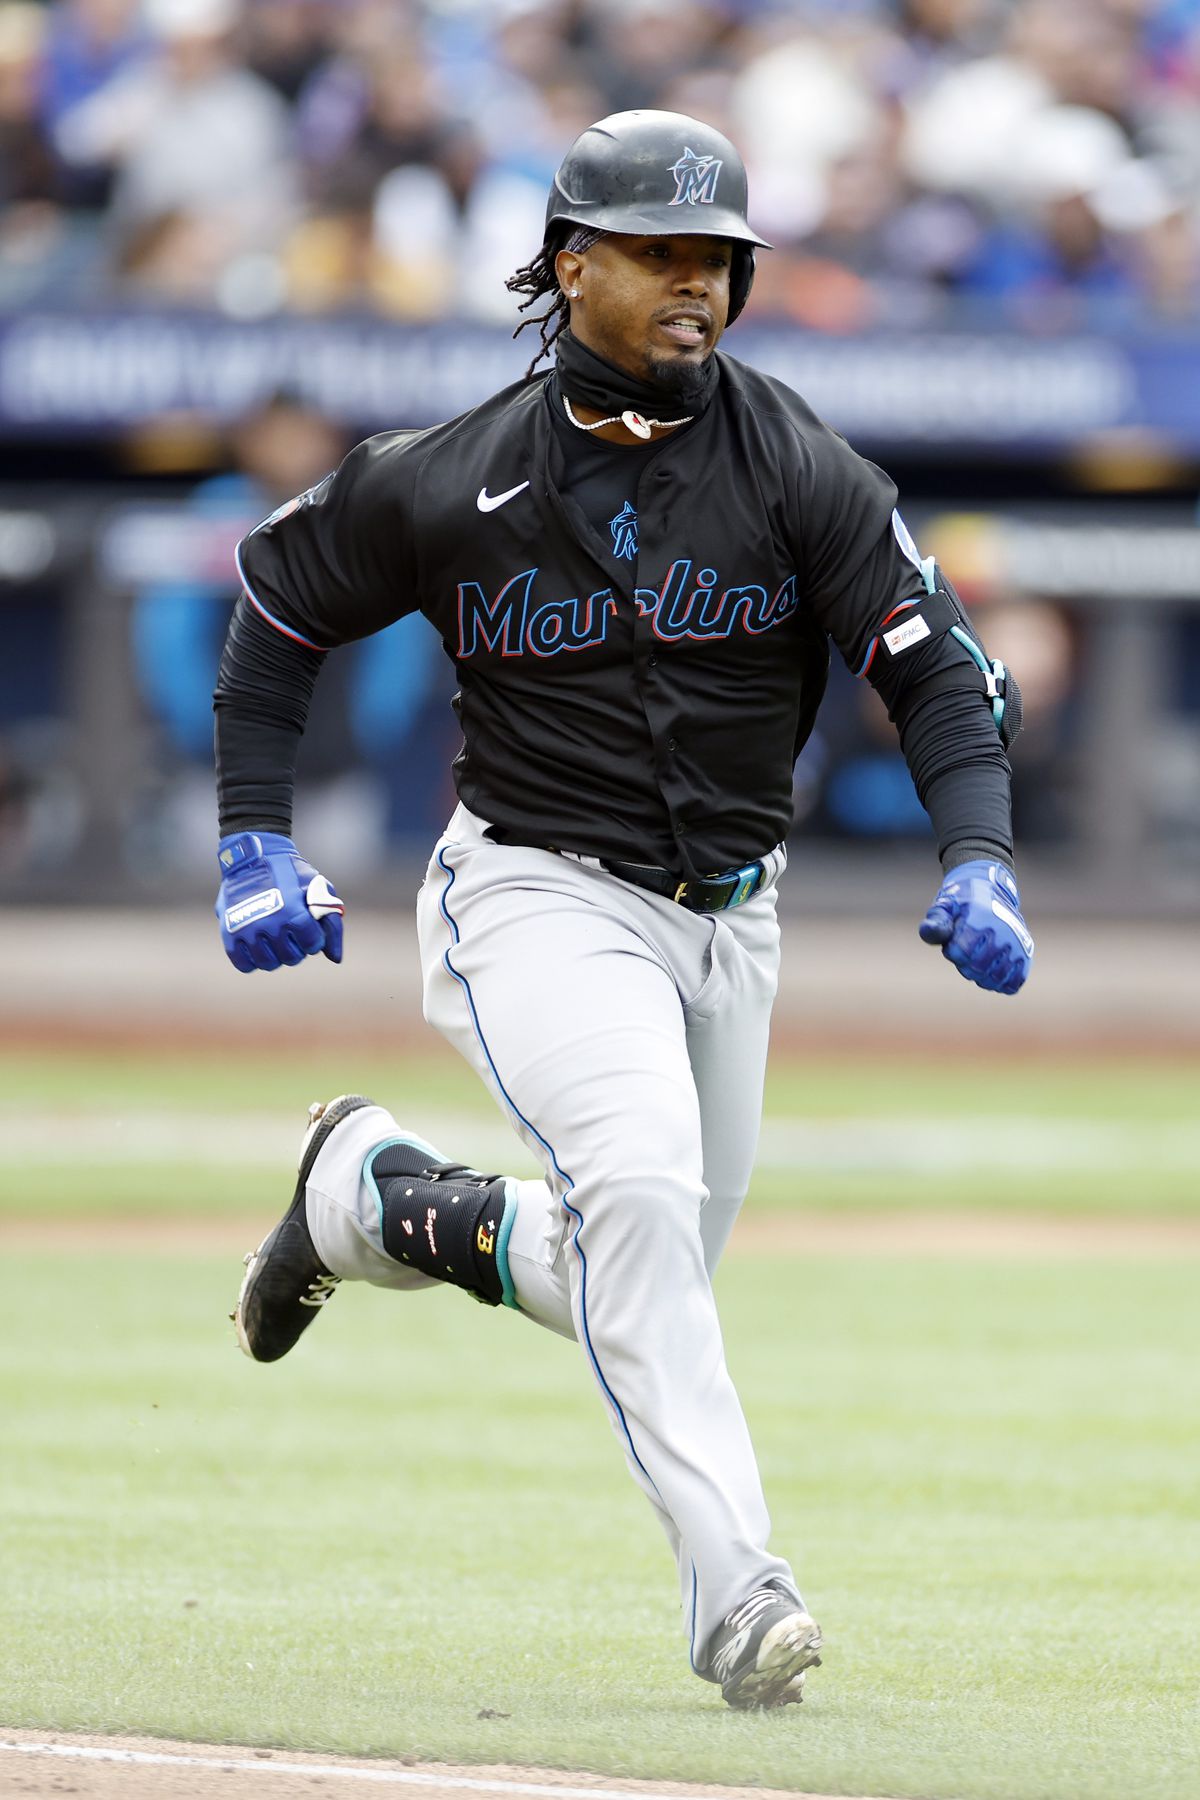 Jean Segura #9 of the Miami Marlins runs to first during the fourth inning against the New York Mets at Citi Field on April 08, 2023 in the Flushing neighborhood of the Queens borough of New York City.